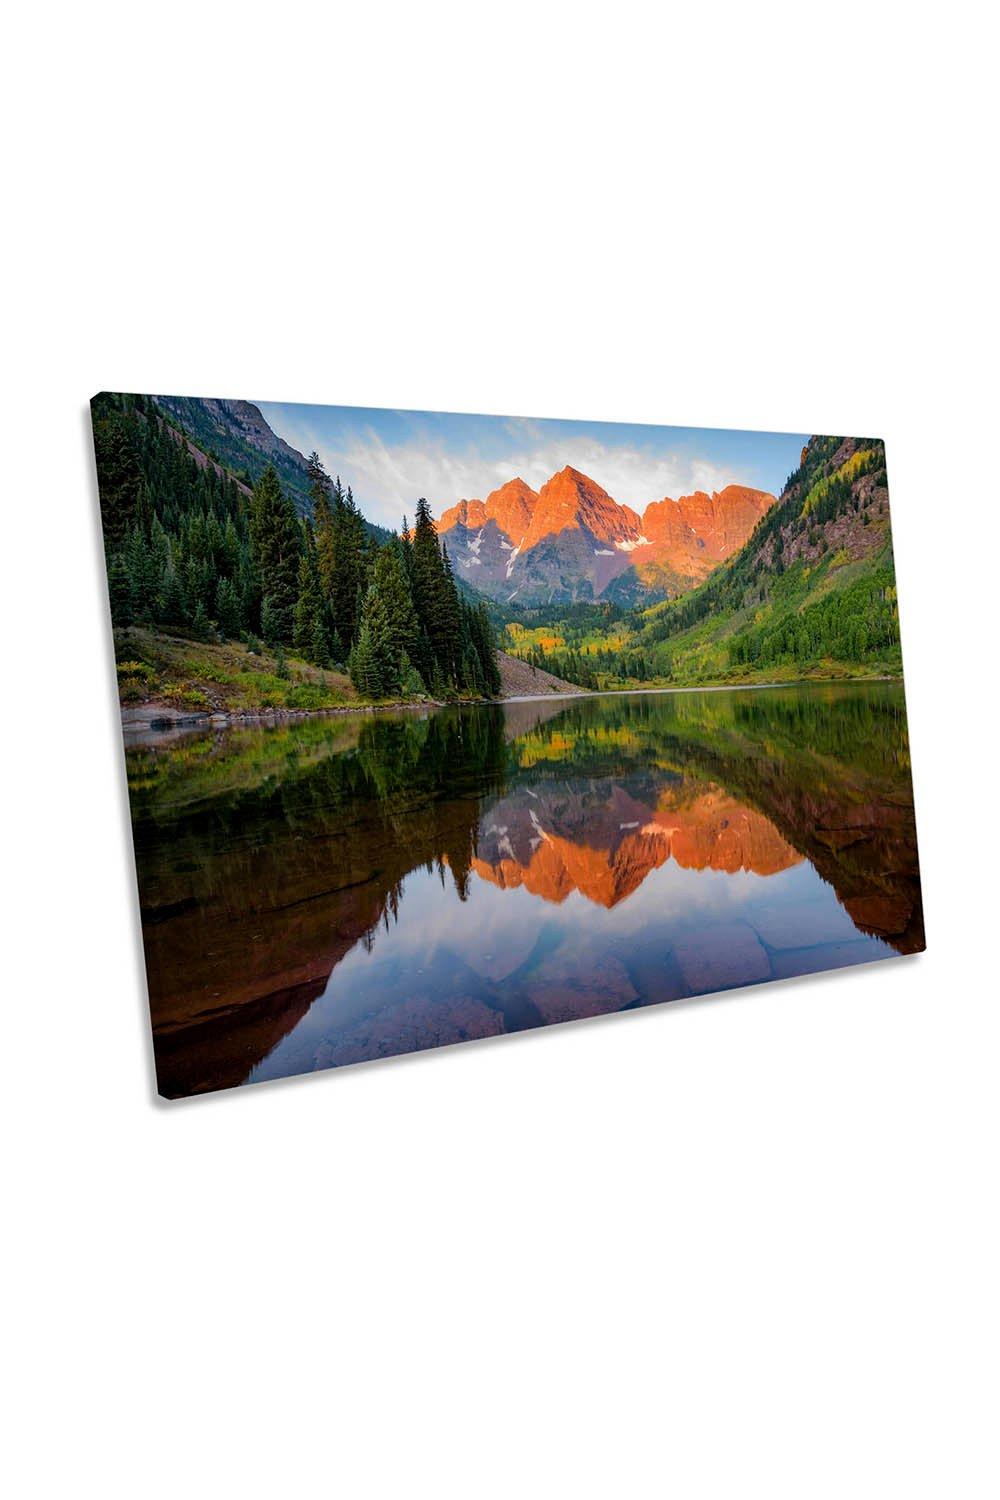 Morning Raga Mountain Reflection Canvas Wall Art Picture Print